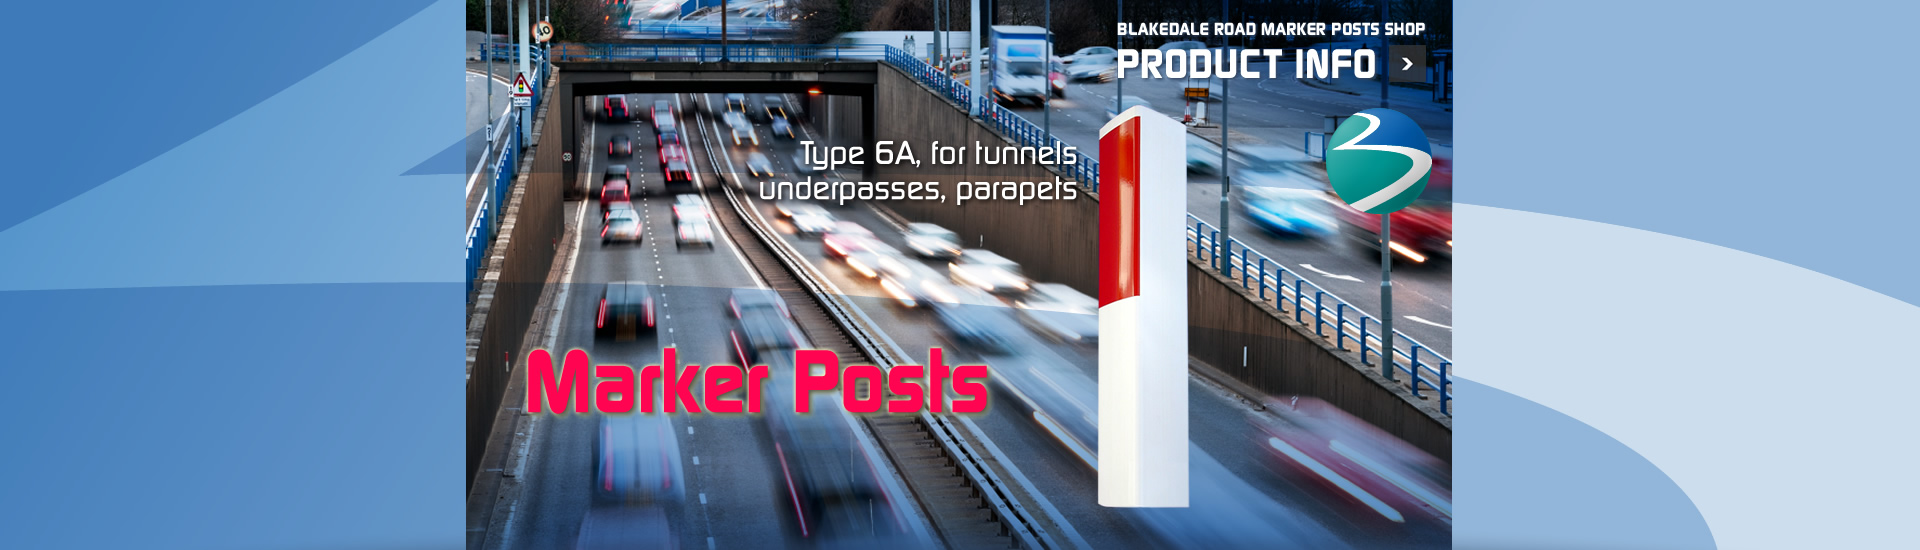 S-3-Marker-Post-Type-6A-tunnels-underpasses-parapets